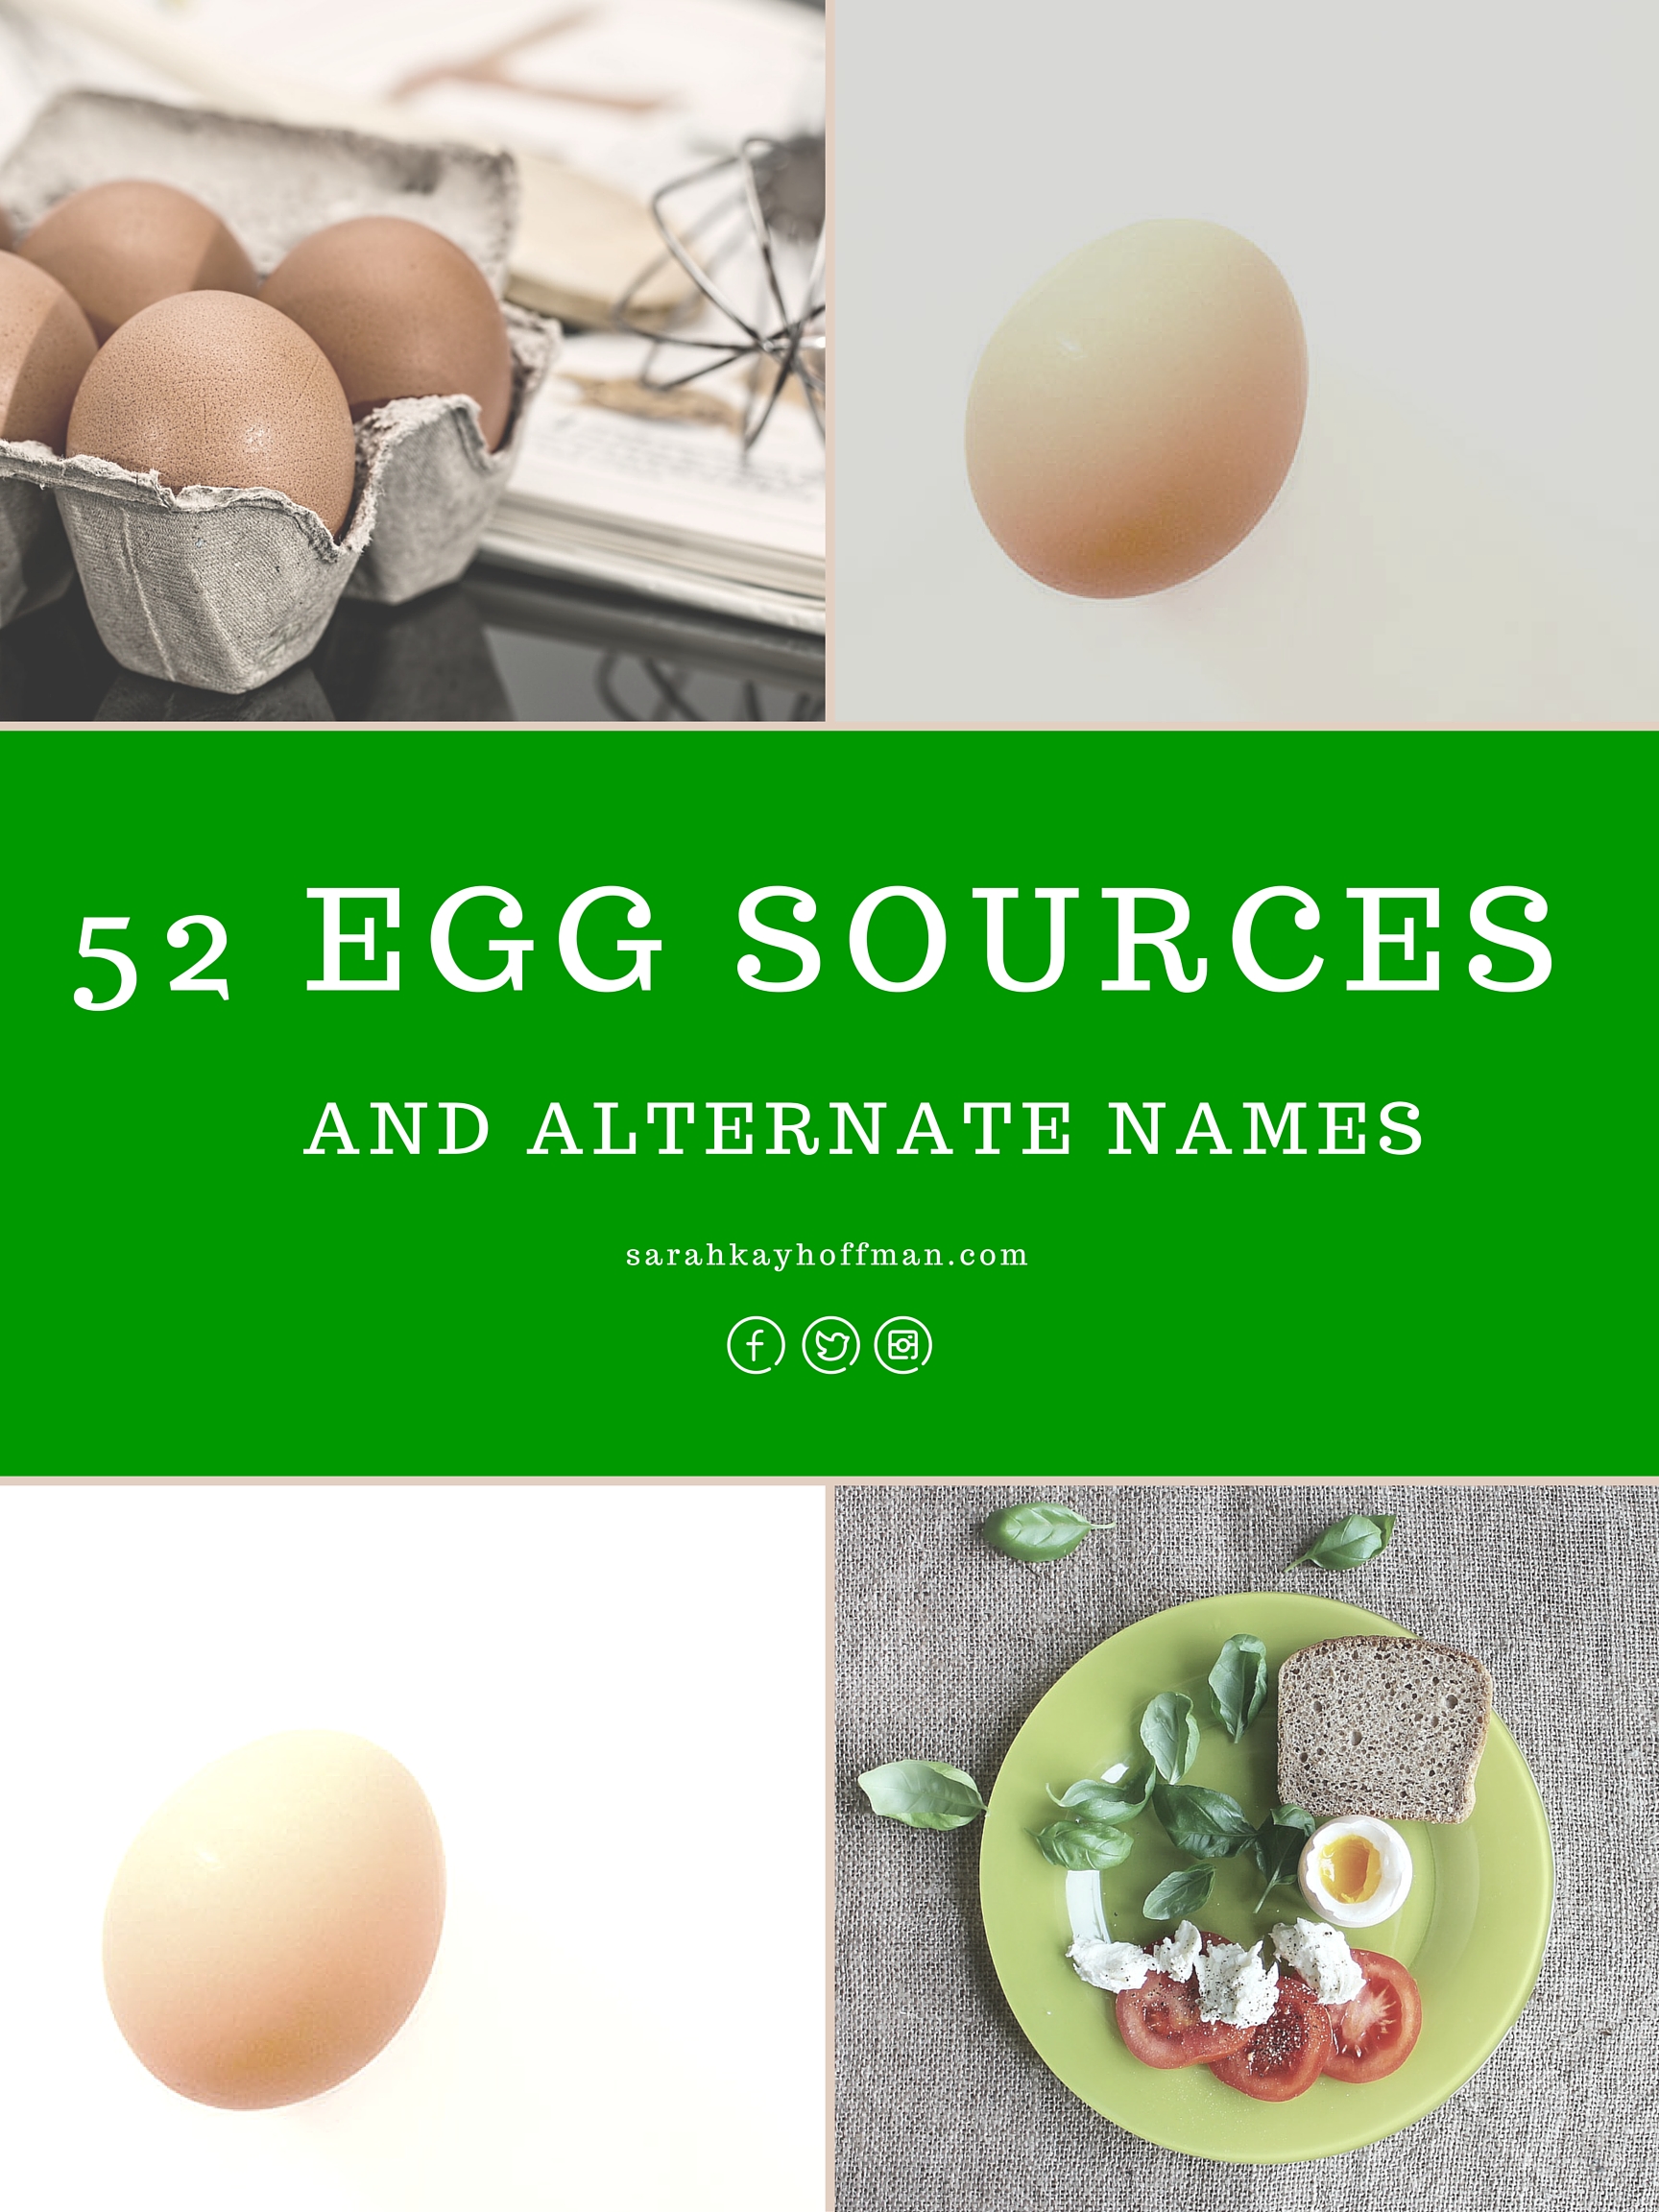 52 Egg Sources and alternate names Egg Allergy and Egg Intolerance sarahkayhoffman.com #guthealth #eggs #healthyliving